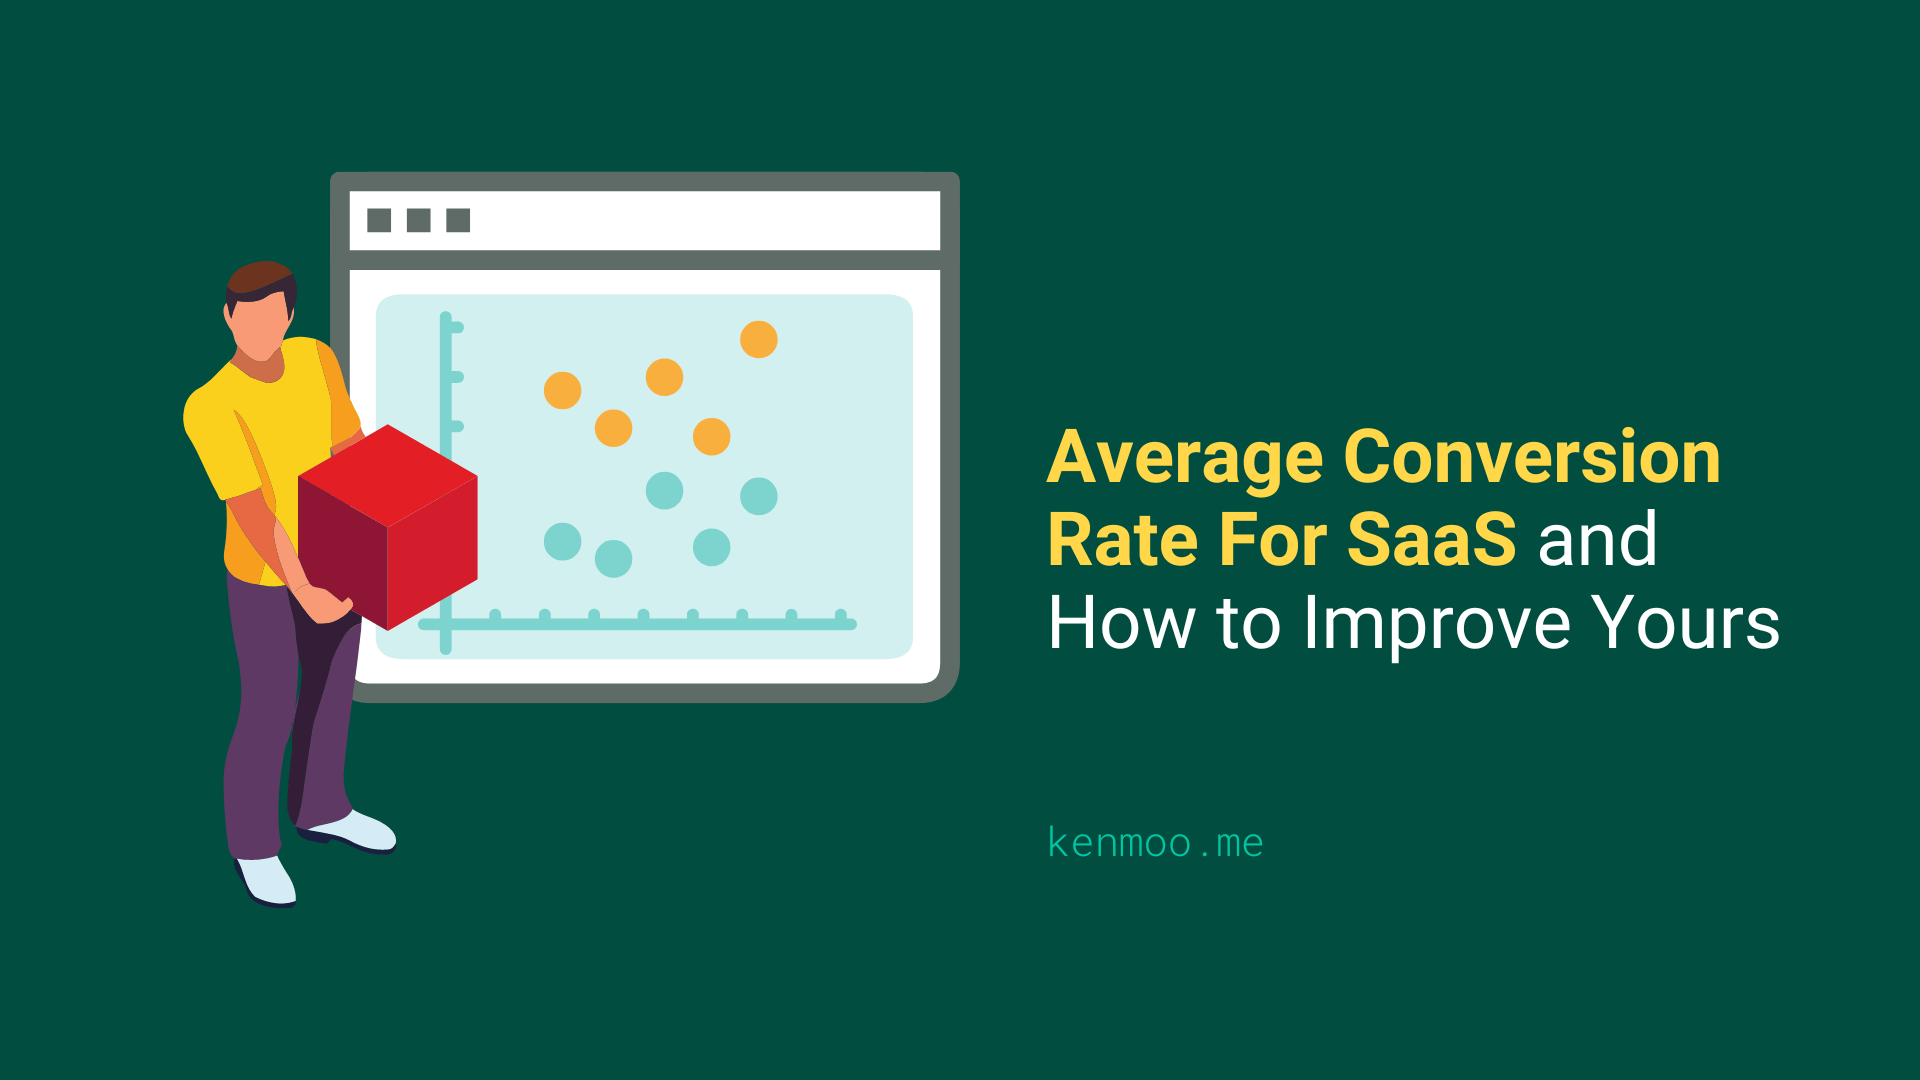 Average Conversion Rate For SaaS and How to Improve Yours